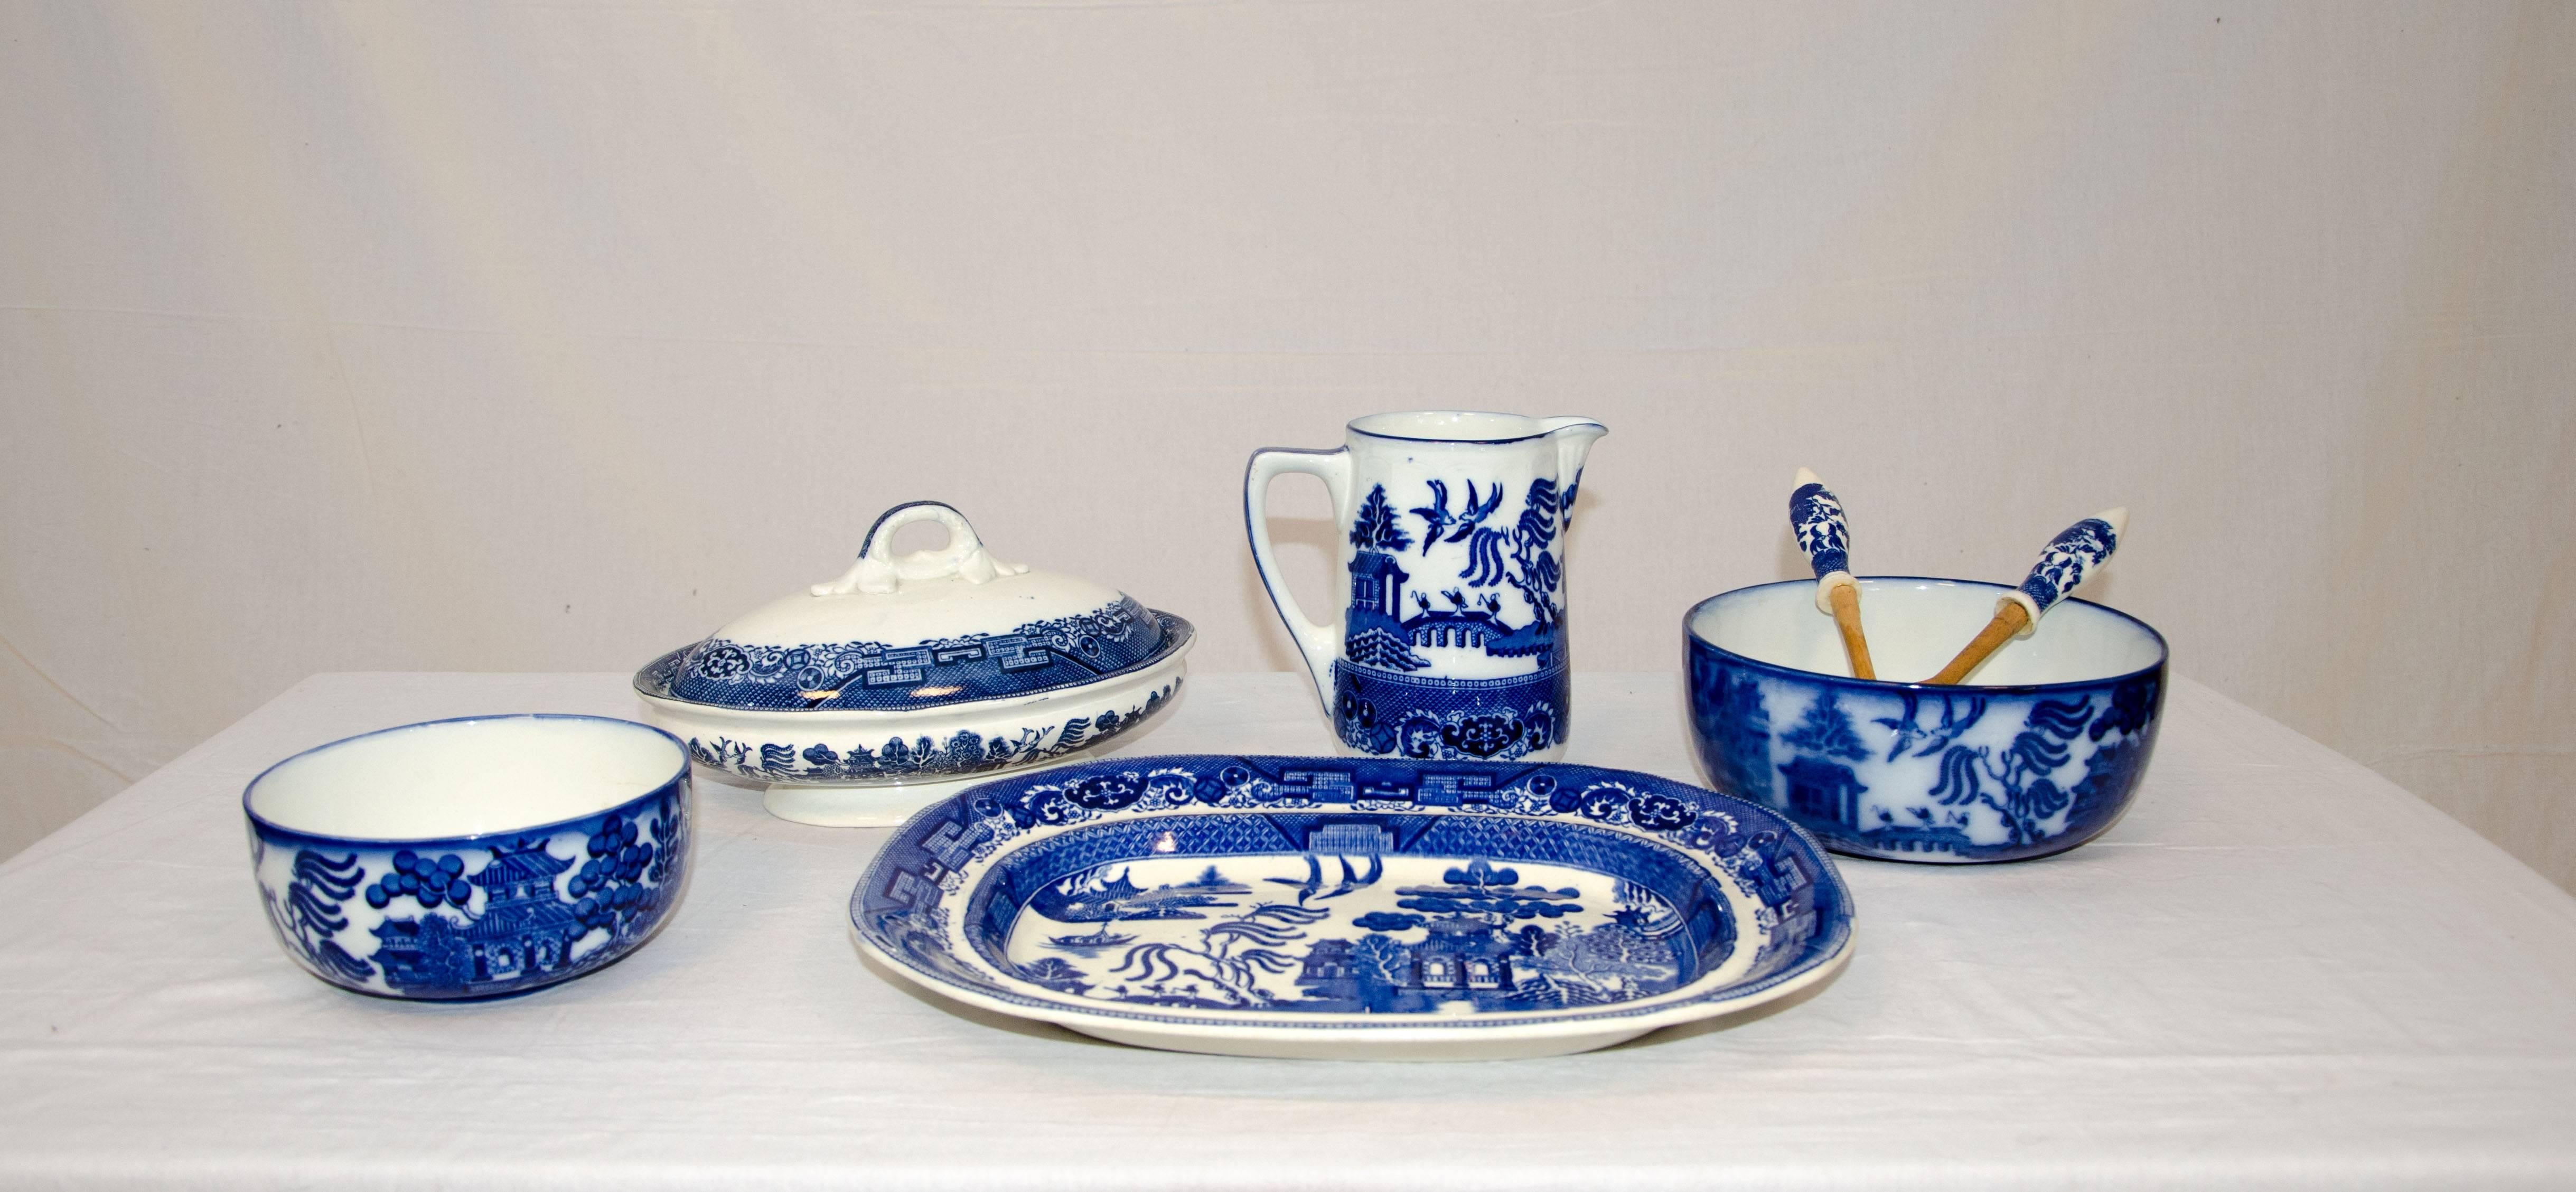 This collection of blue willow china will be very usefull for your dinner service, very nice flow blue coloring.
Measures: One large bowl, Doulton Burslem, 9